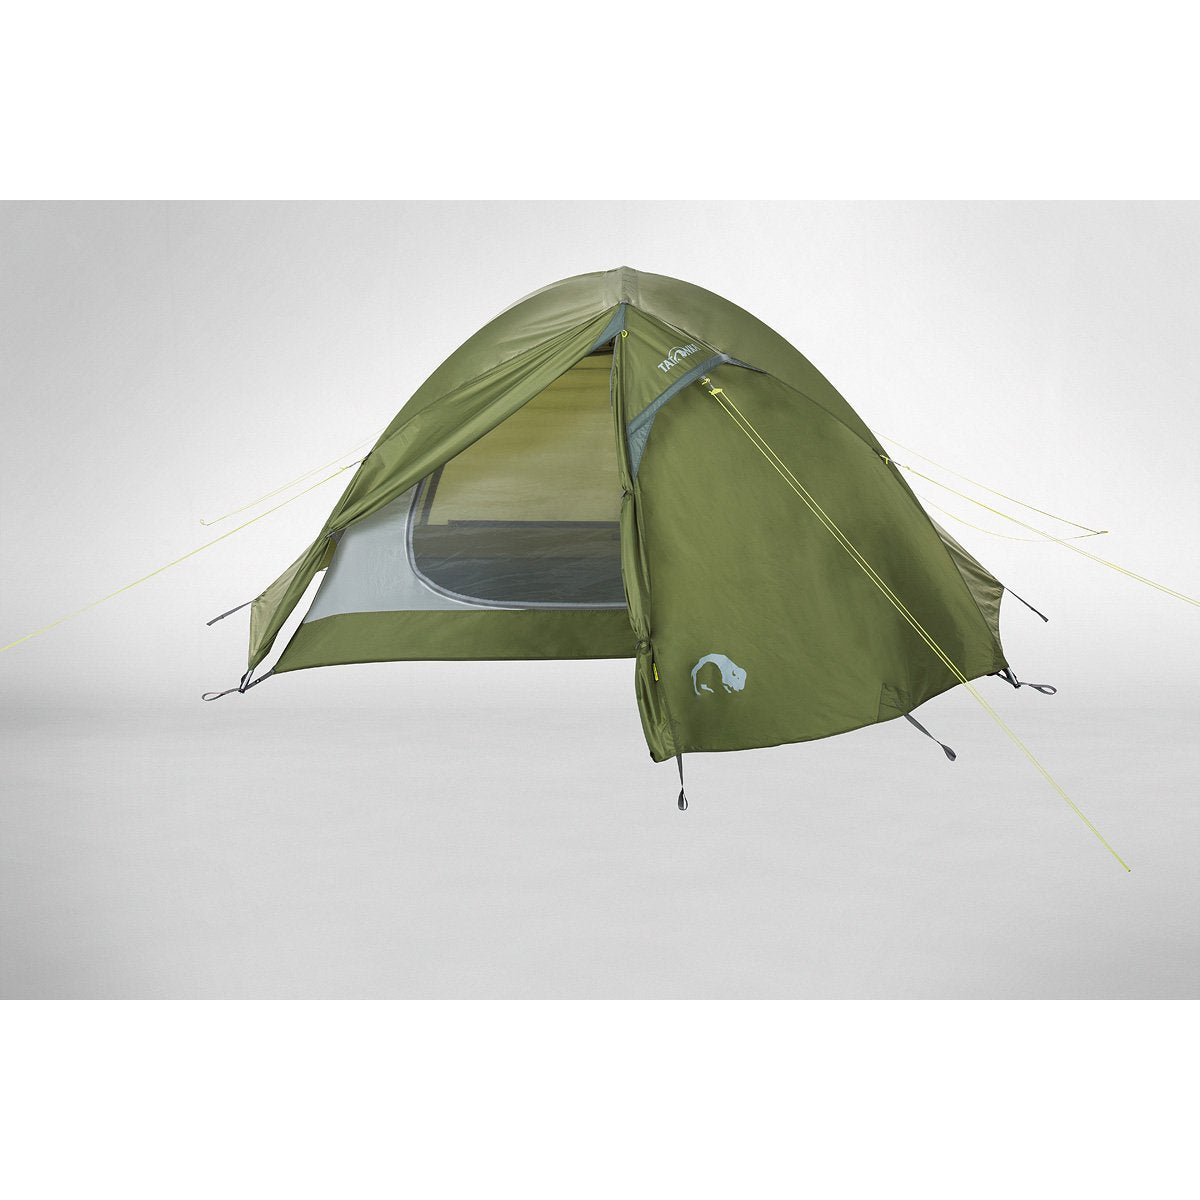 Tatonka Mountain Dome II Light Olive 2 Persons Tent Outdoor and Survival Products Tatonka Tactical Gear Supplier Tactical Distributors Australia